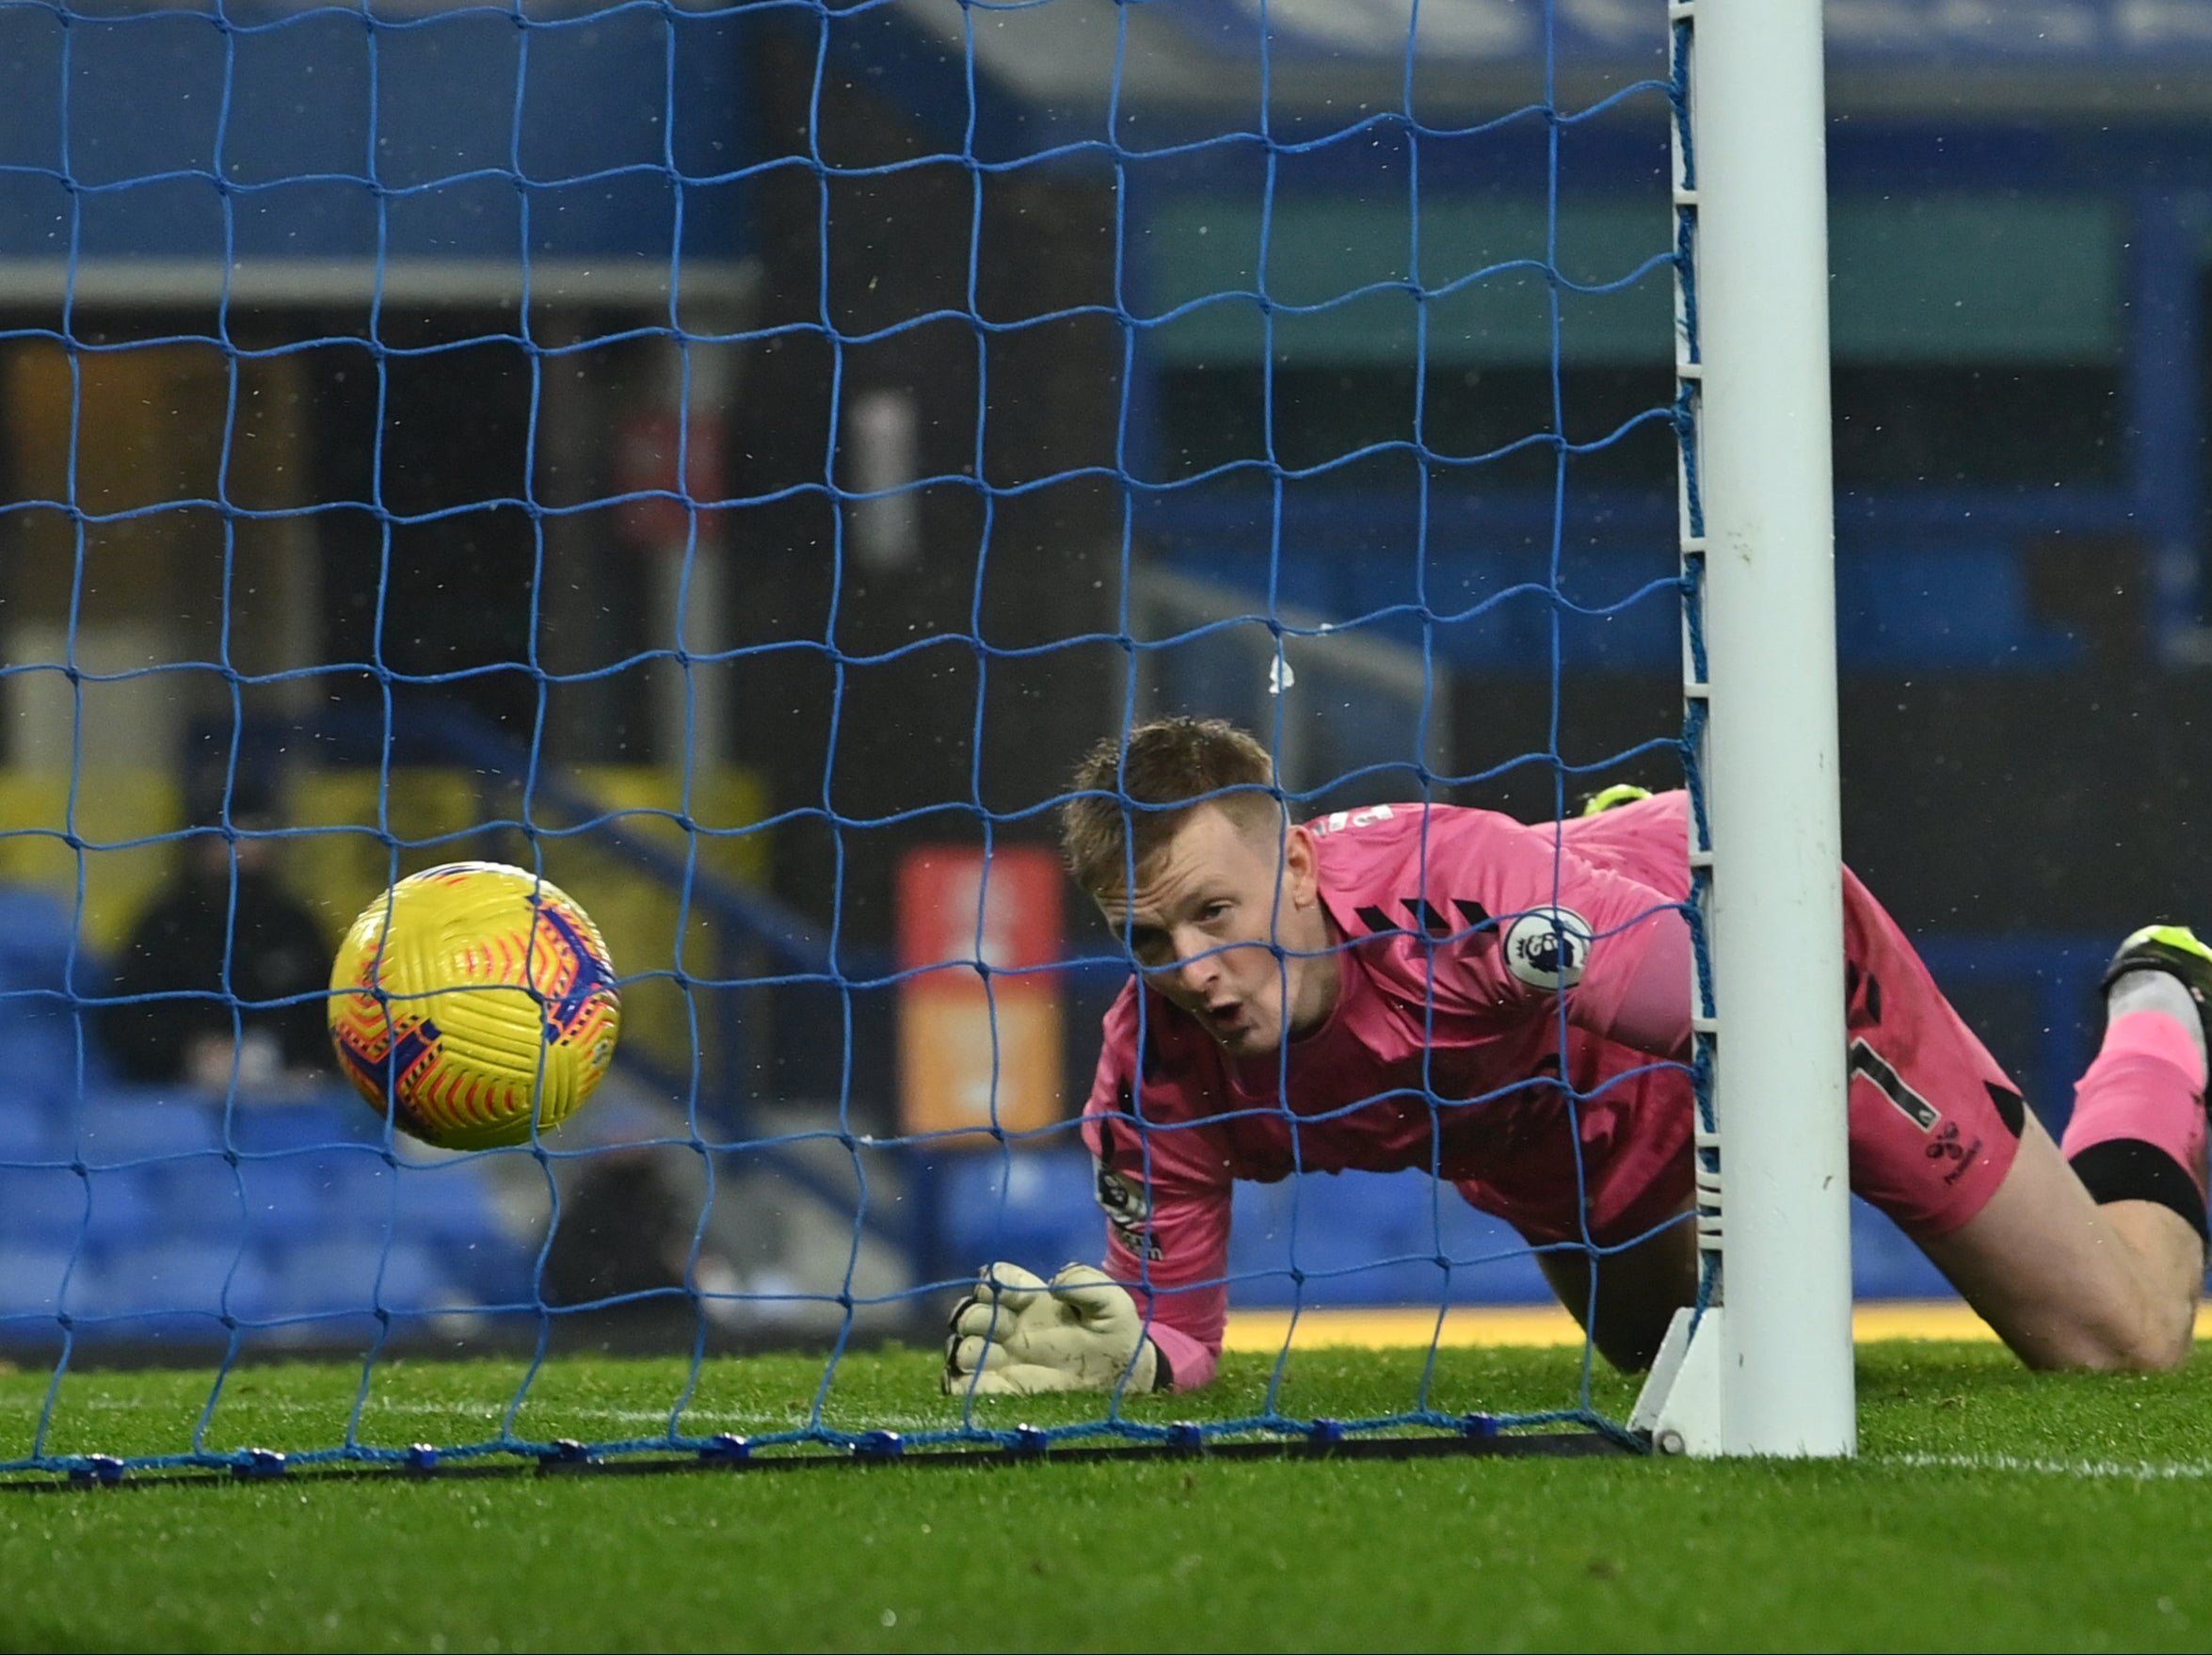 Everton’s lead was cancelled out following Jordan Pickford’s mistake